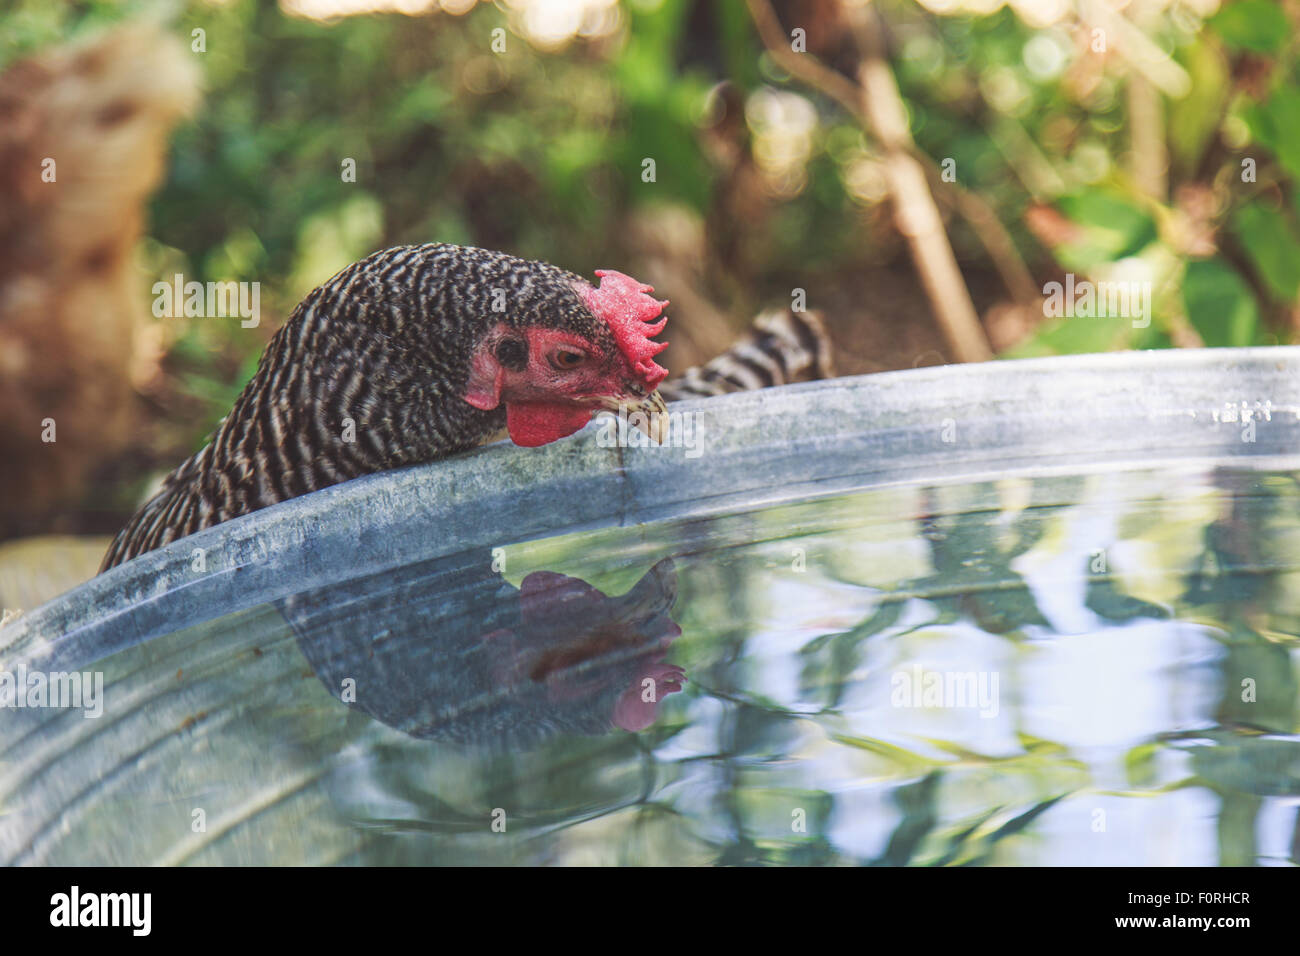 Chicken looking into water at reflection Stock Photo